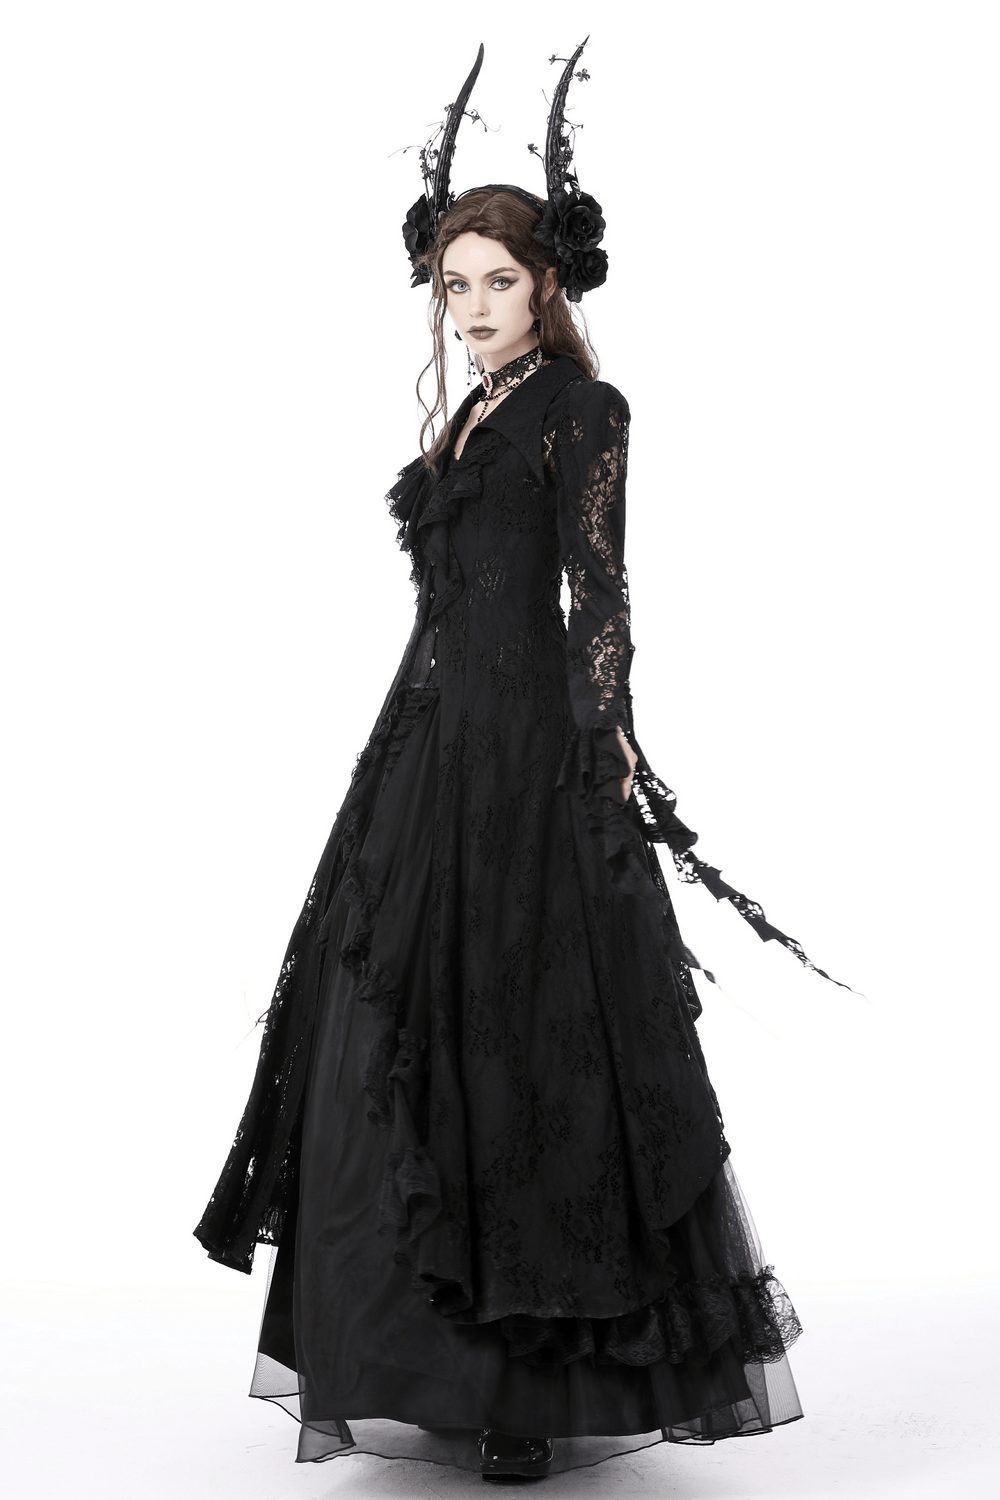 Black Lace Cape with Daring Cutouts - Gothic Romance